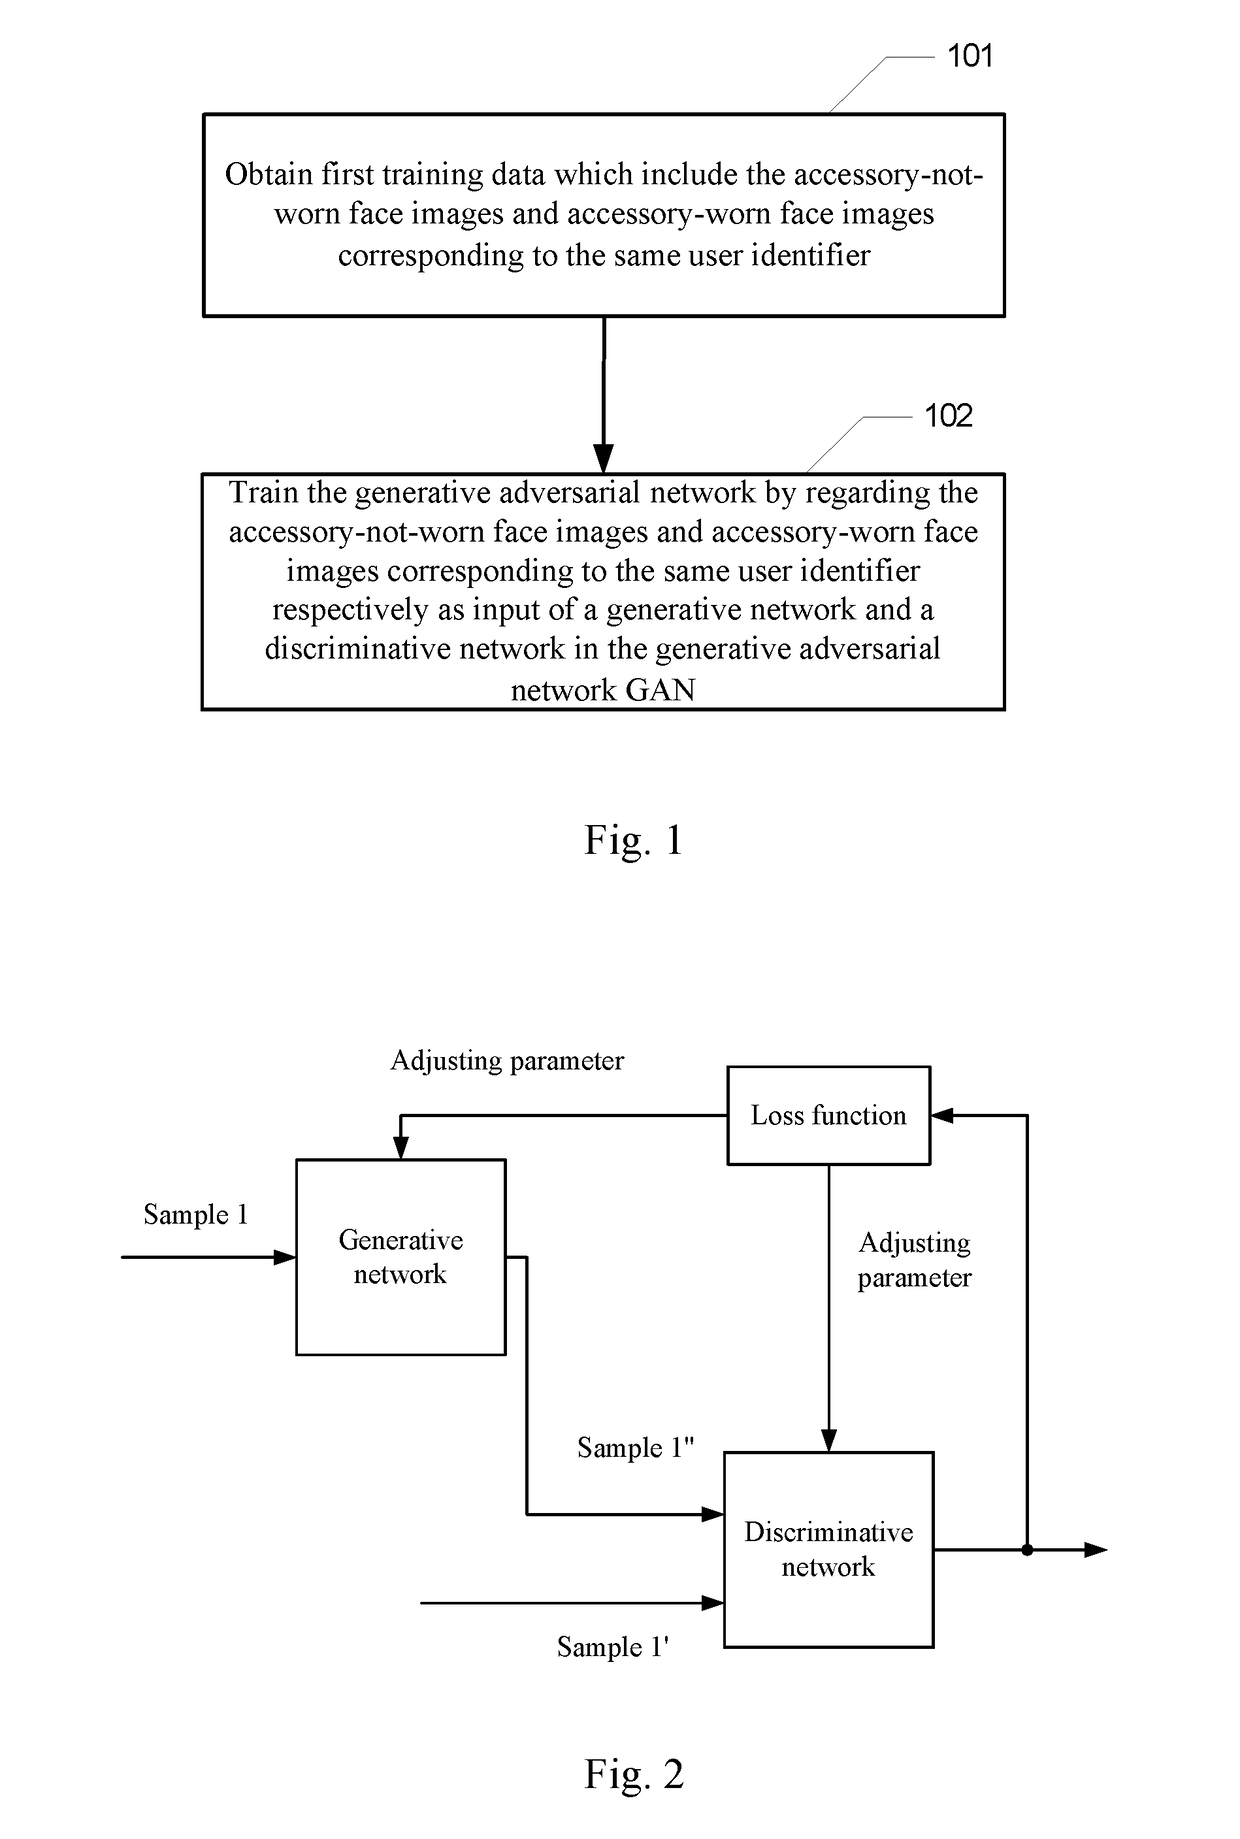 Method and apparatus for generating training data for human face recognition, device and computer storage medium